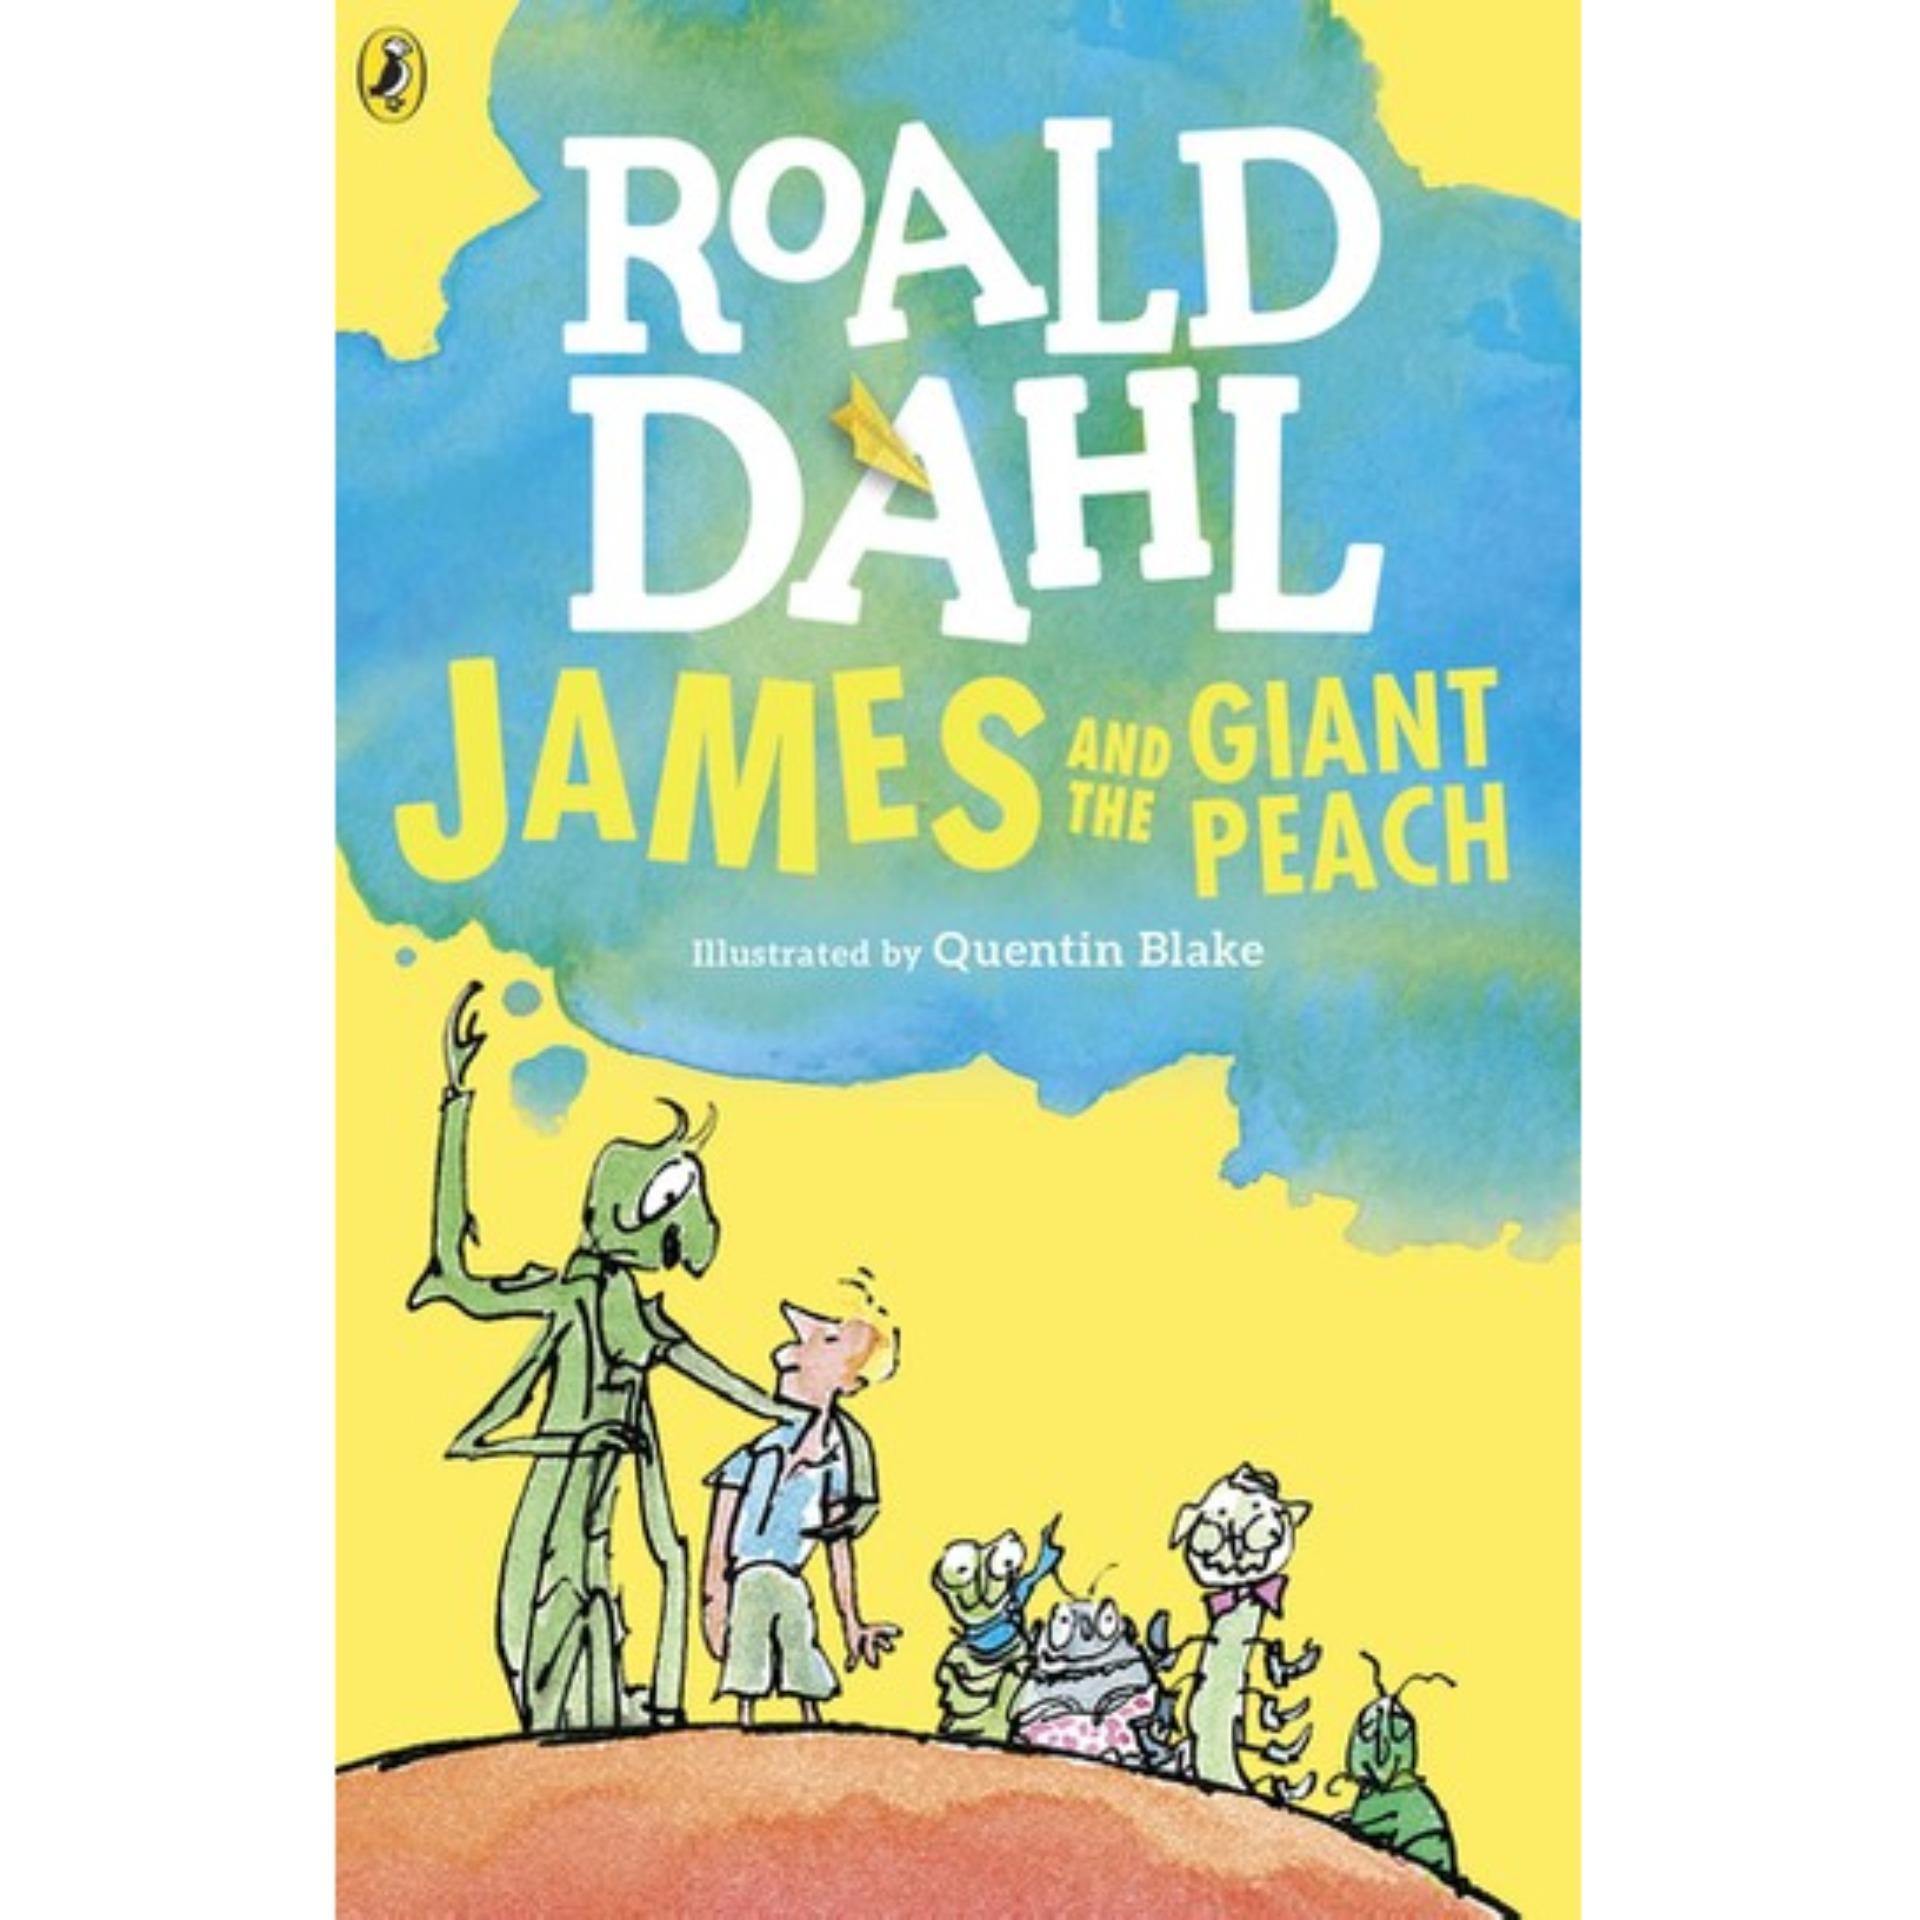 James and the Giant Peach by Roald Dahl - Book A Book